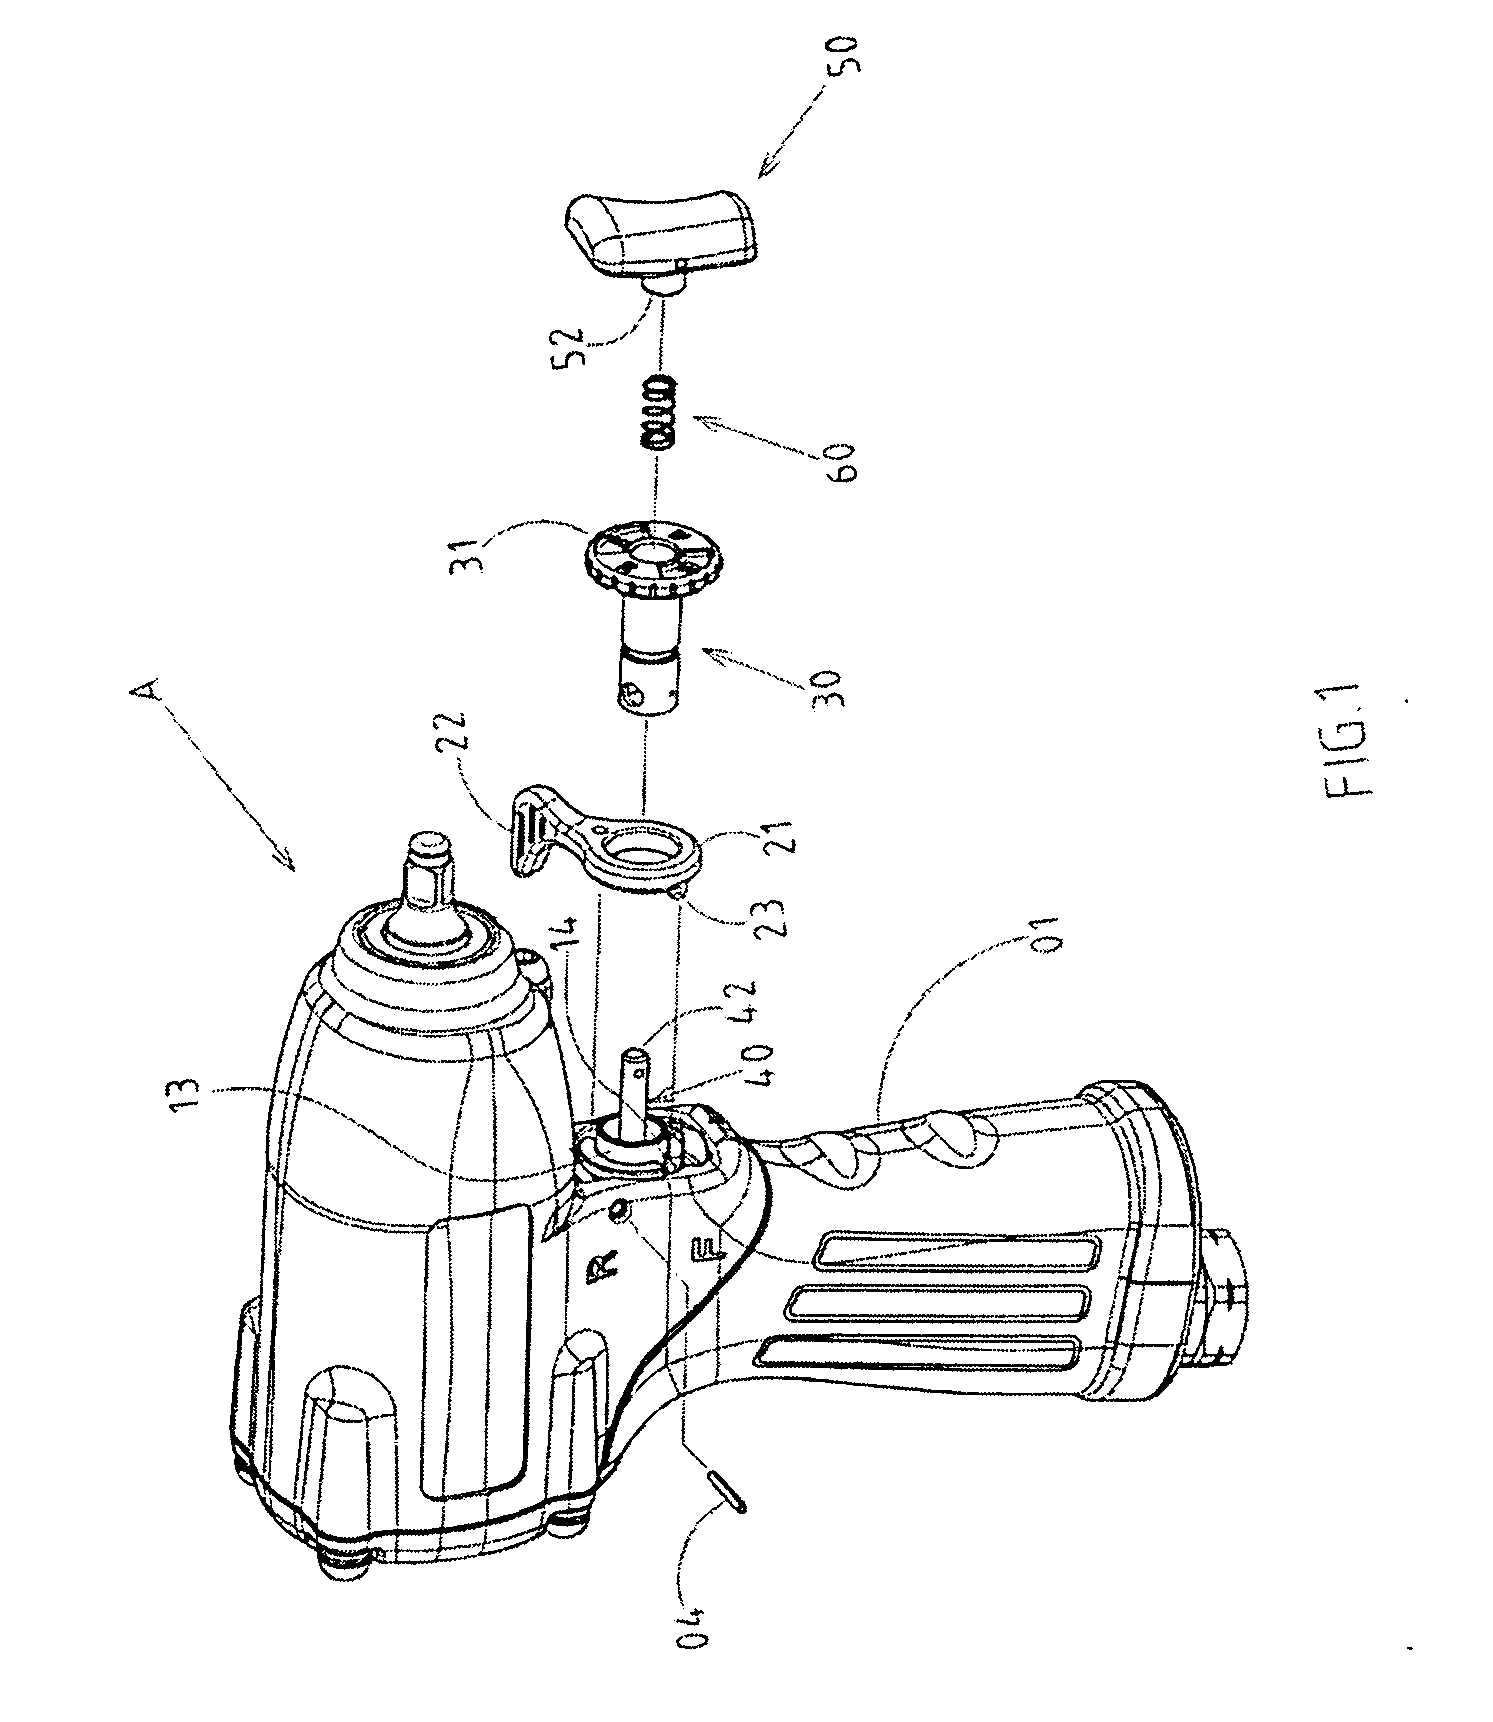 Switchover mechanism for a reversible control valve of a pneumatic tool